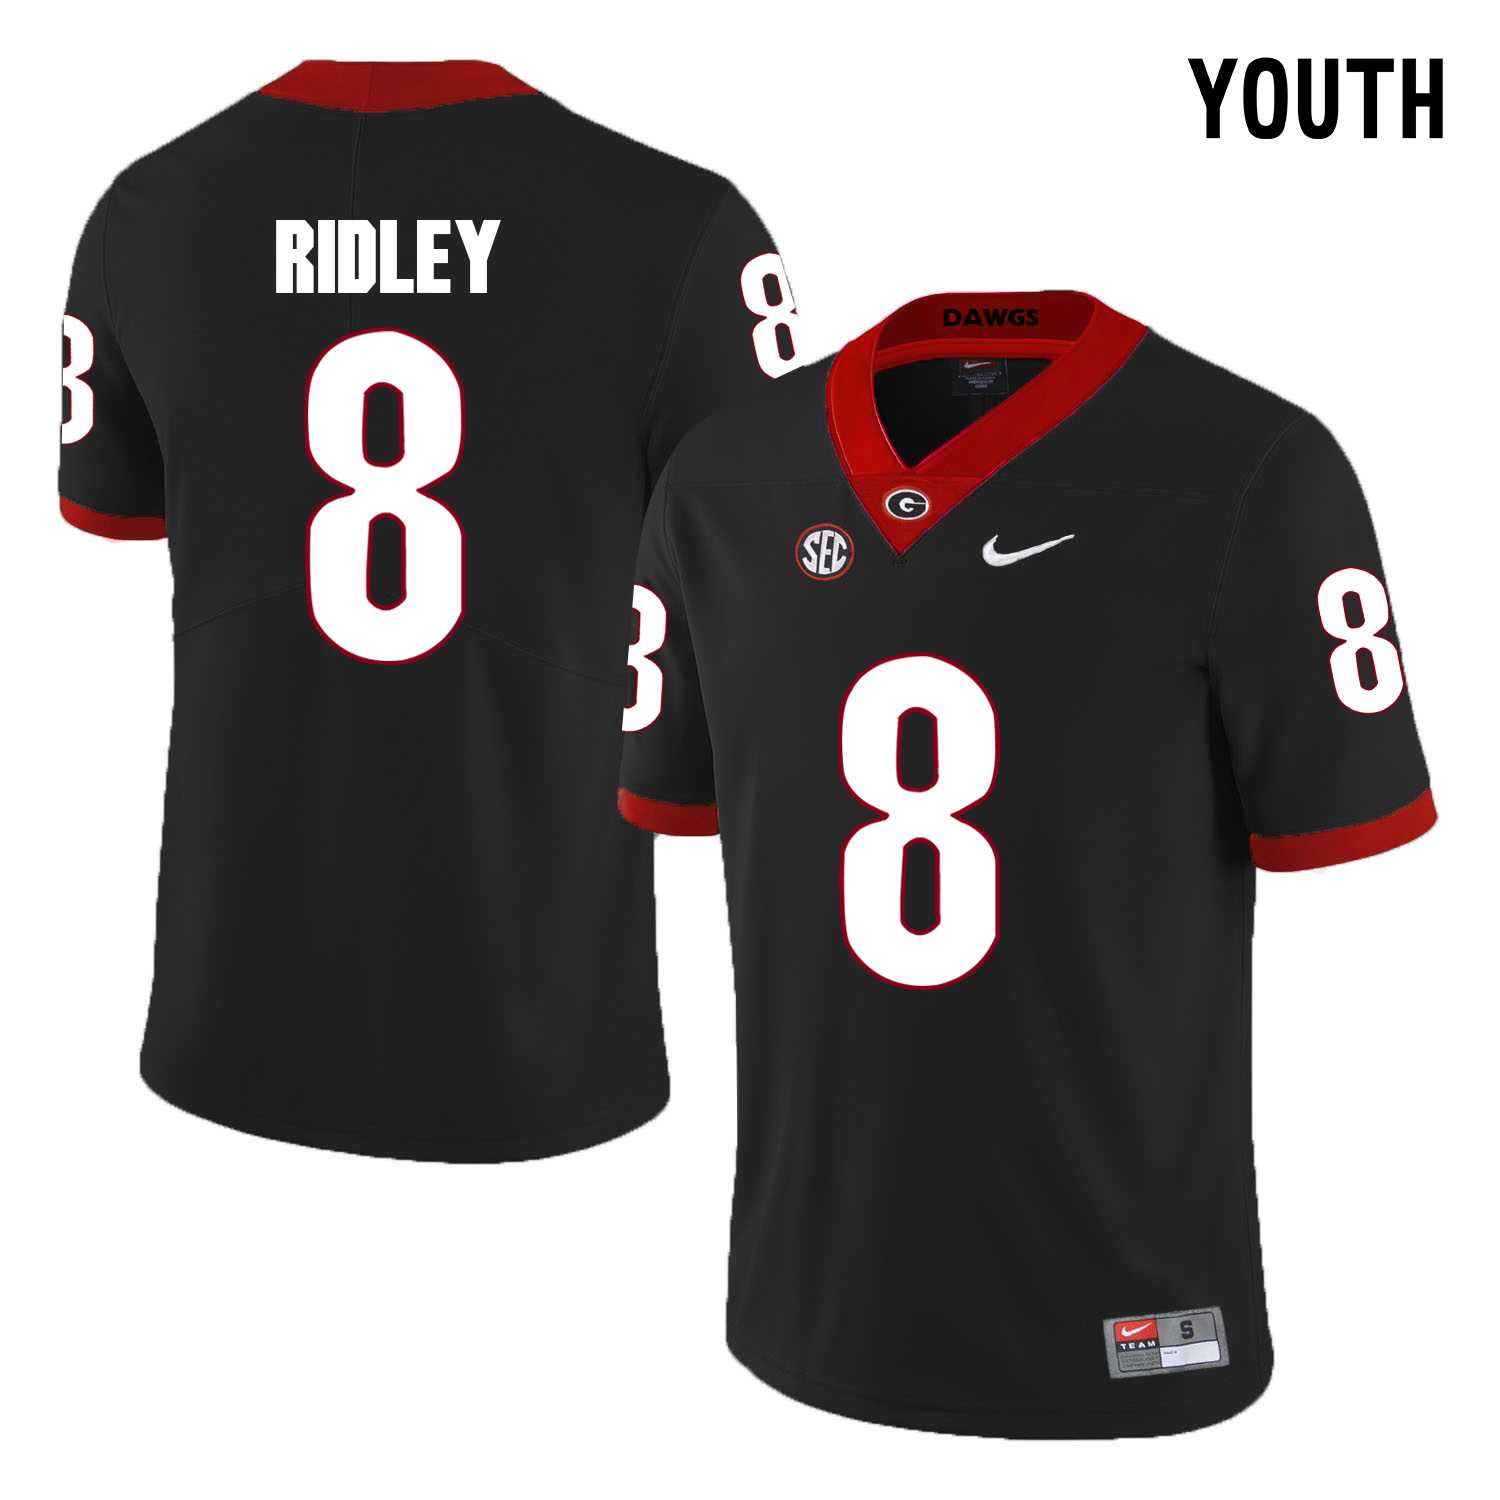 Georgia Bulldogs 8 Riley Ridley Black Youth College Football Jersey DingZhi